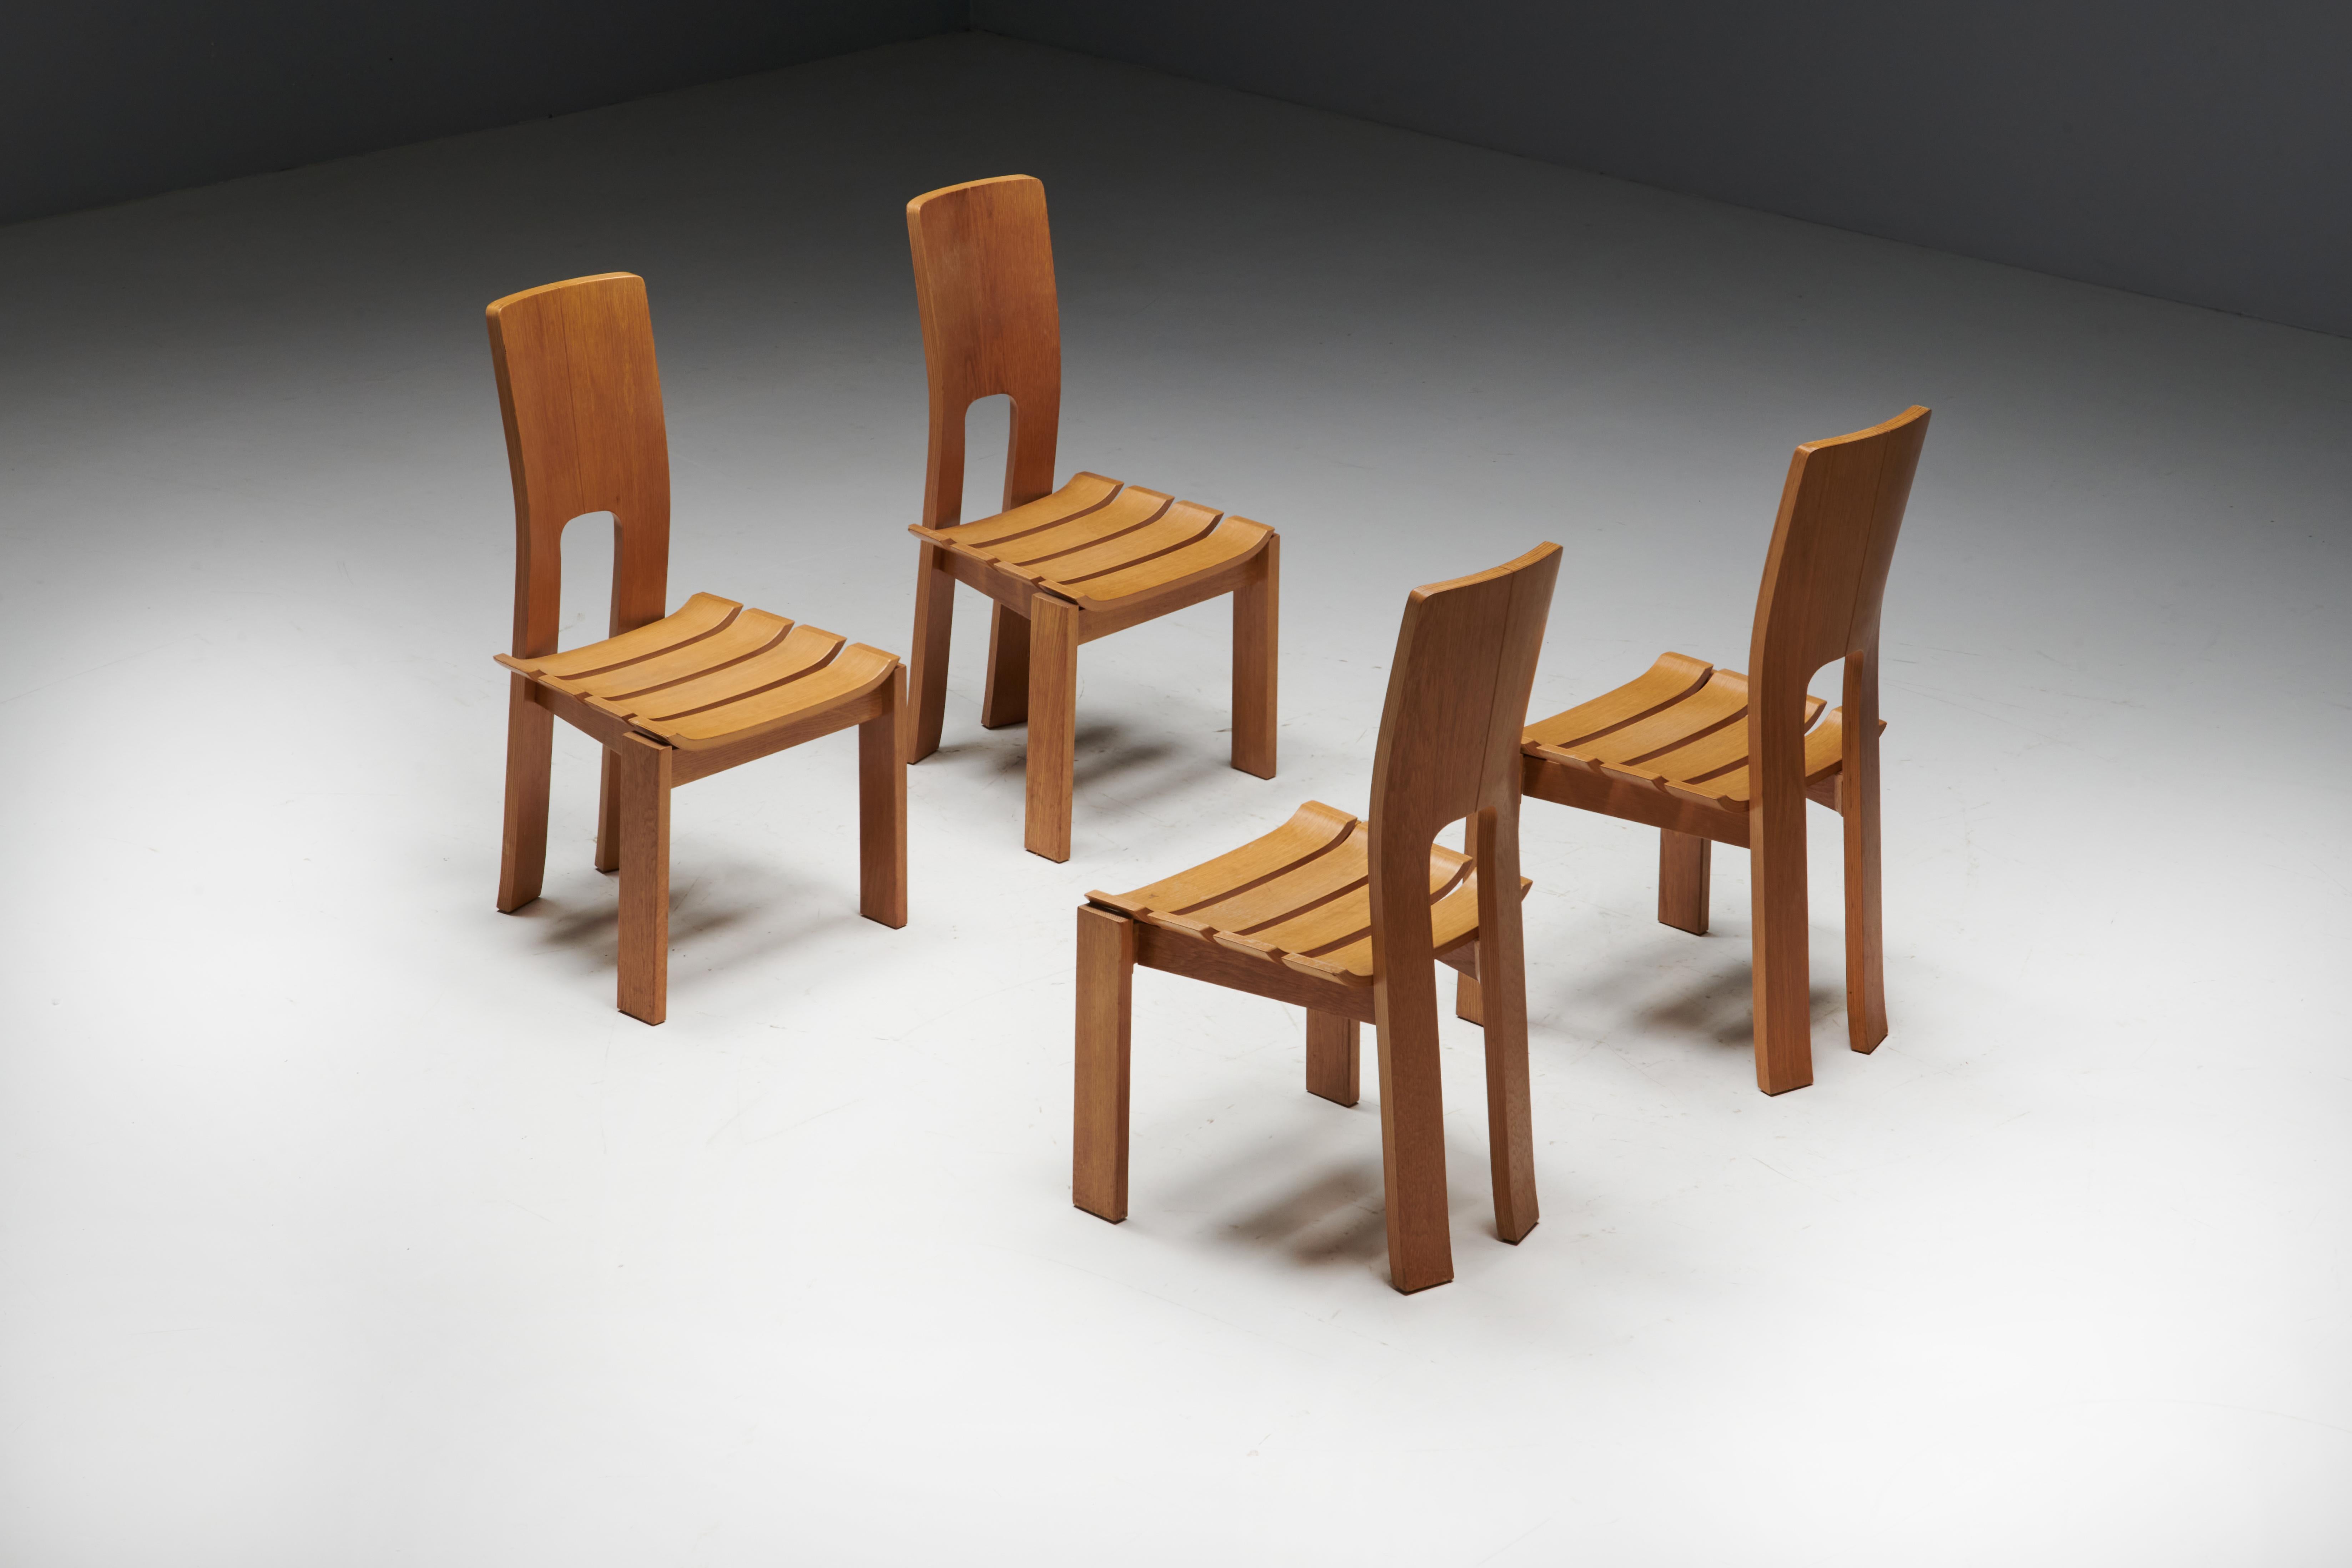 20th Century Scandinavian Modern Plywood Dining Chairs, 1970s For Sale